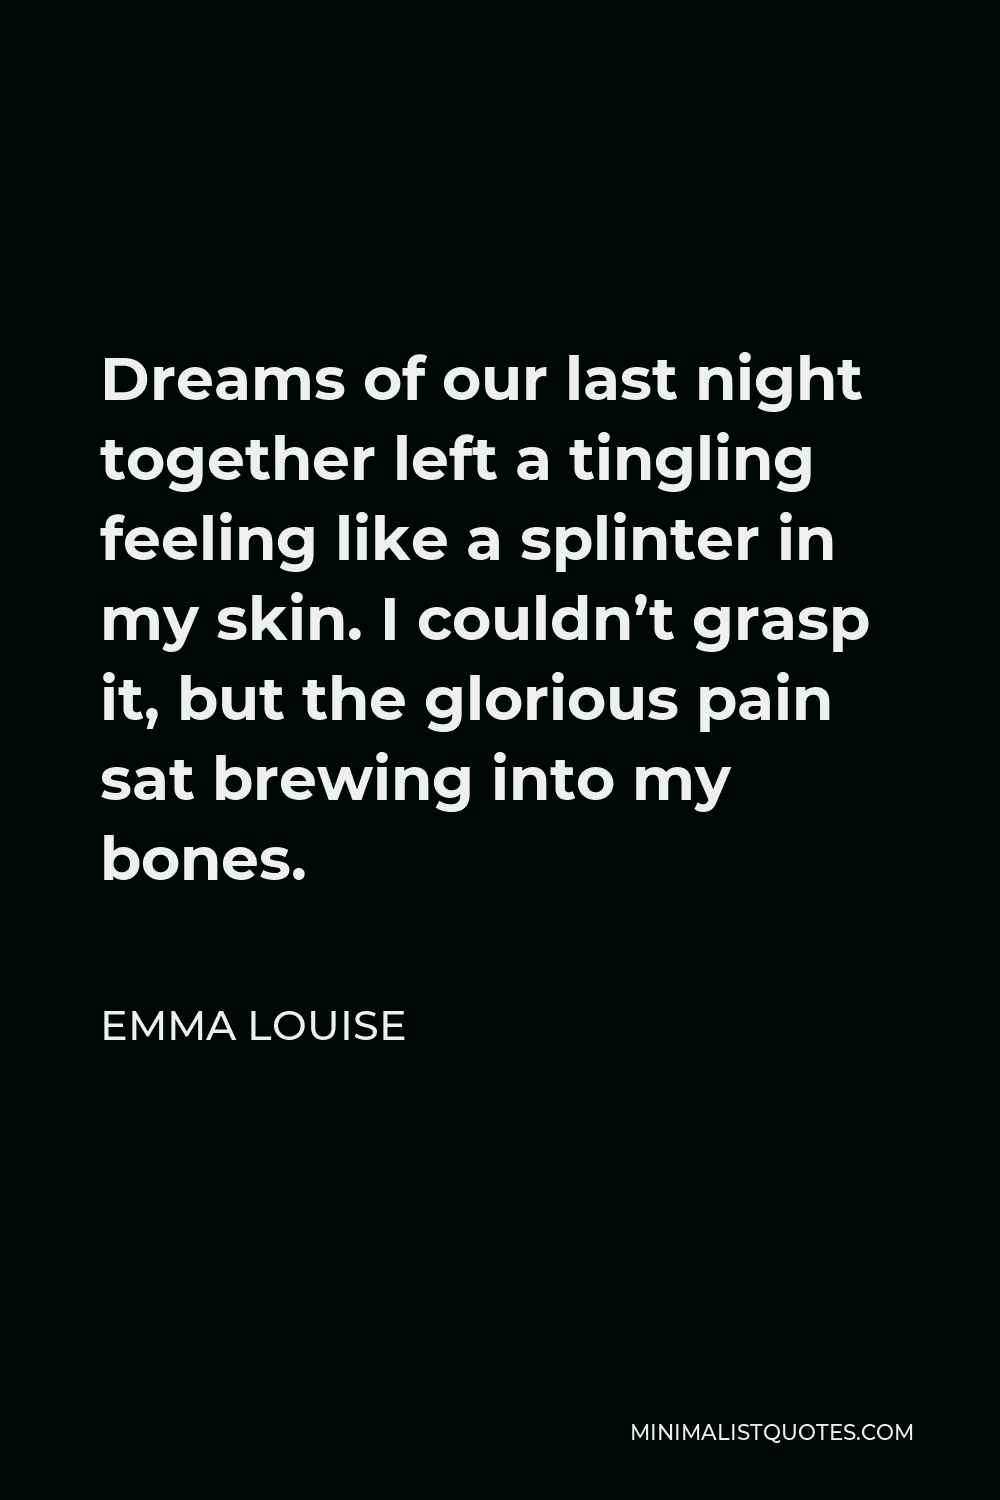 Emma Louise Quote - Dreams of our last night together left a tingling feeling like a splinter in my skin. I couldn’t grasp it, but the glorious pain sat brewing into my bones.